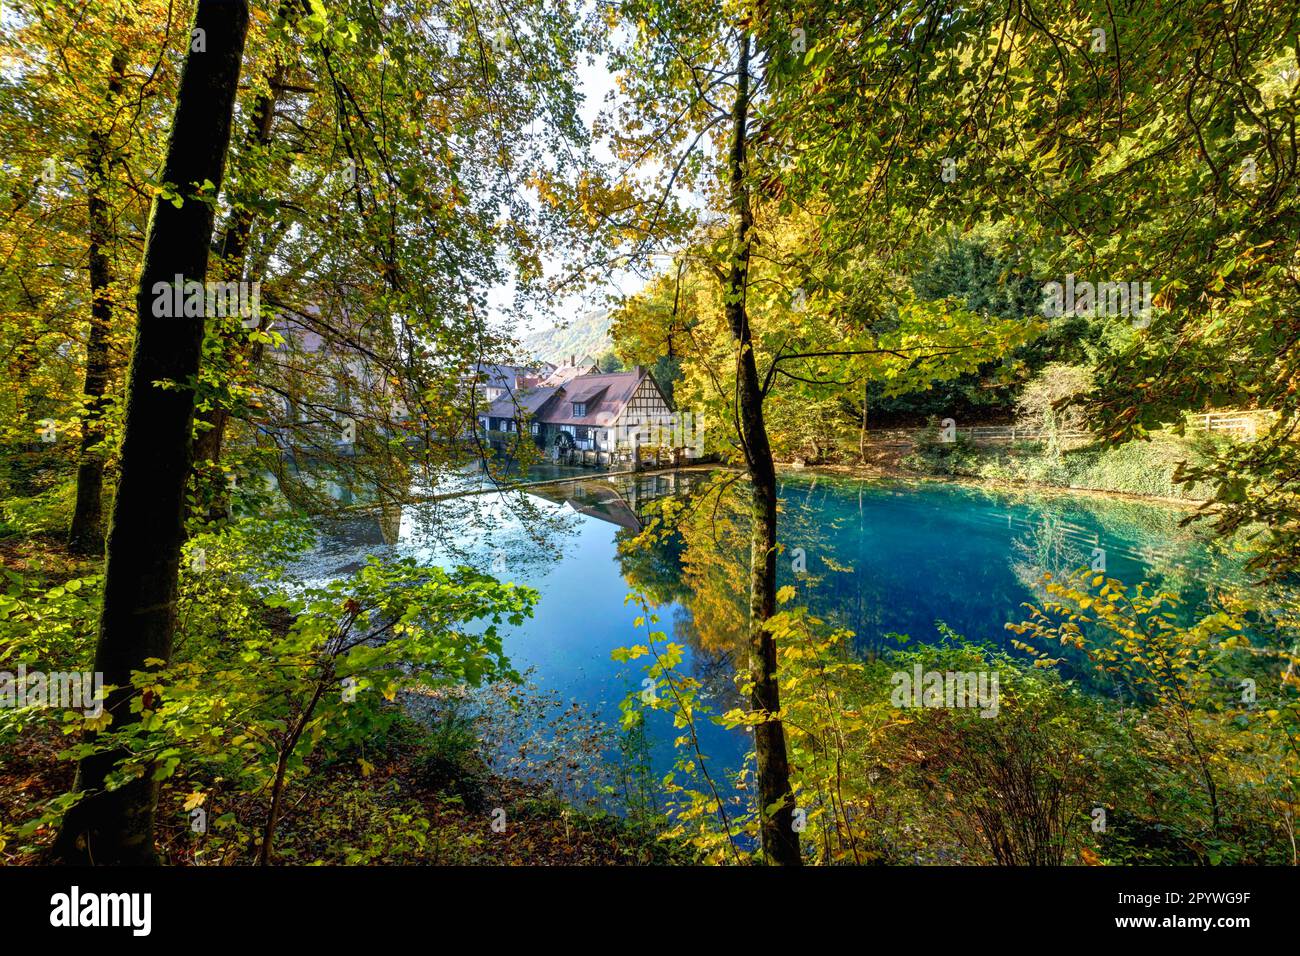 Indian Summer at the Blautopf, karst spring with spring pot on the Swabian Alb, source of the Blau, Blaubeuren, Baden-Wuerttemberg, Germany Stock Photo